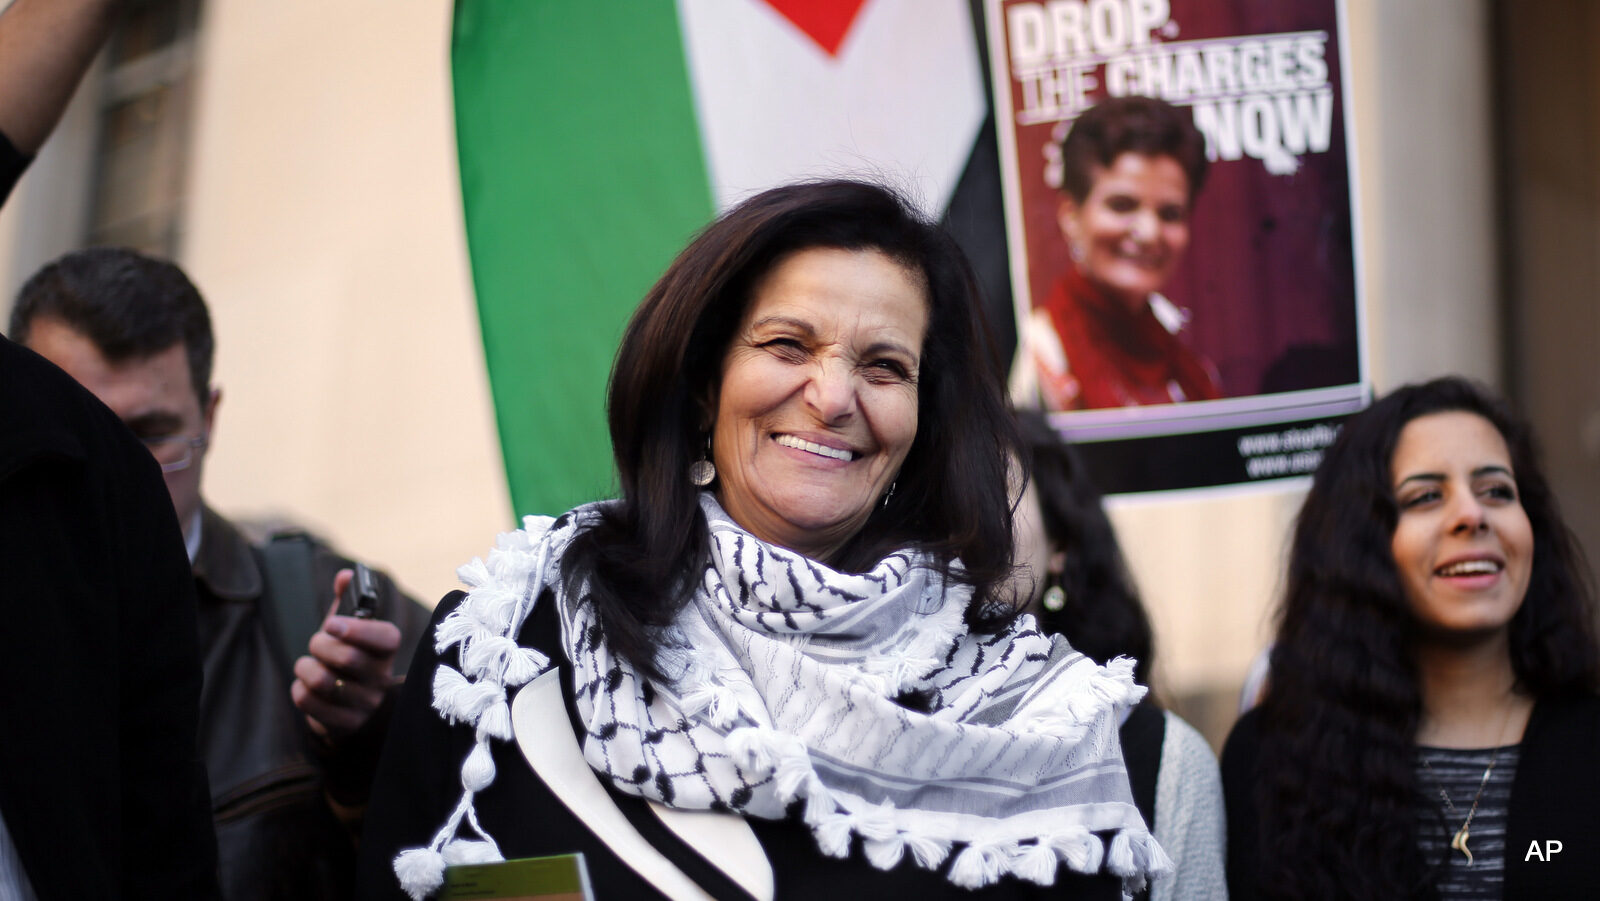 Rasmea Odeh smiles after leaving federal court in Detroit Thursday, March 12, 2015. A judge sentenced the Chicago activist to 18 months in federal prison Thursday for failing to disclose her convictions for bombings in Israel when she applied to be a U.S. citizen. Odeh, 67, also was stripped of her citizenship and eventually will be deported. But she will remain free while she appeals the case.